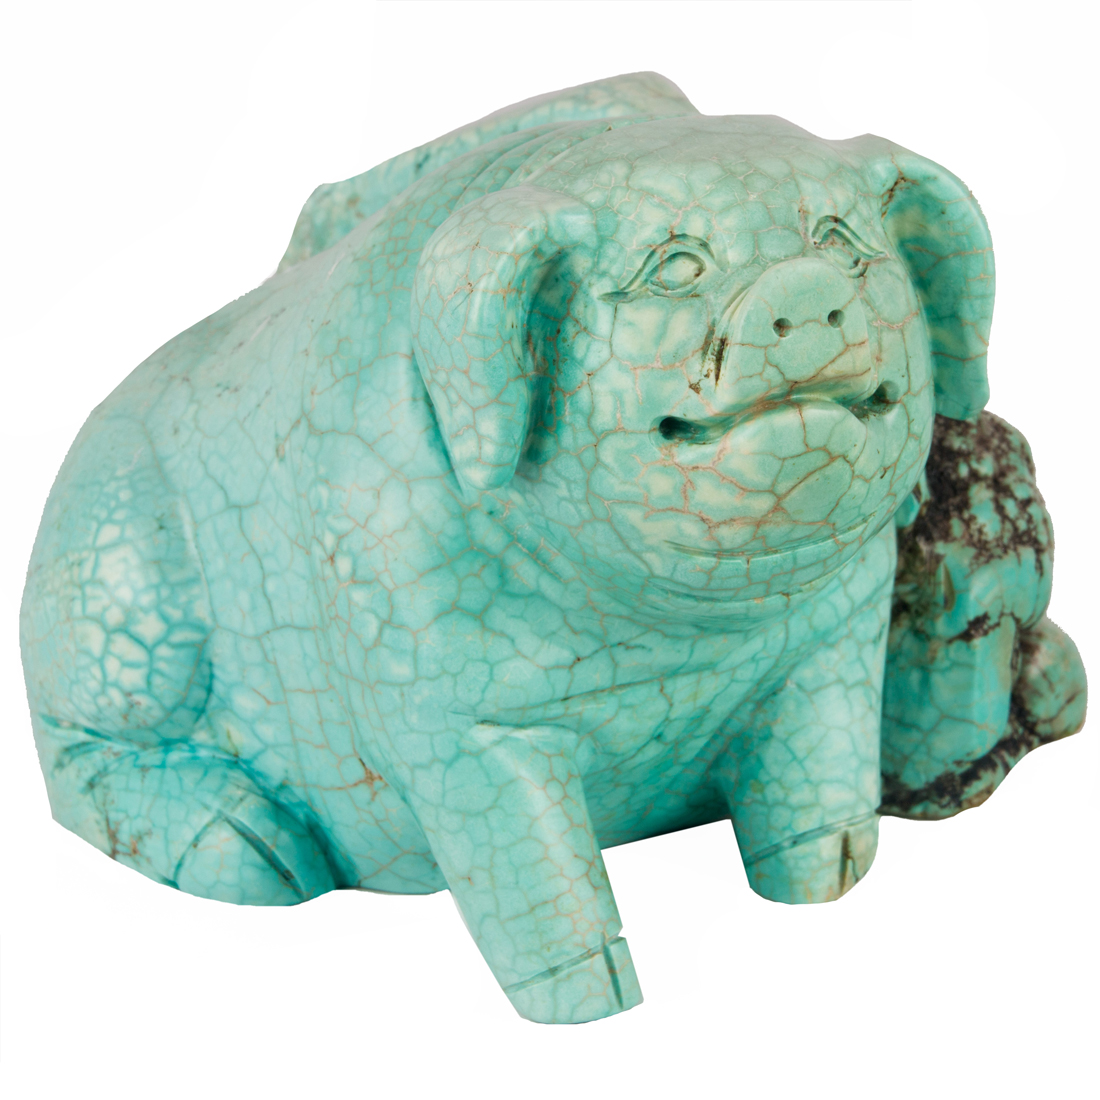 A CARVED TURQUOISE FIGURE OF A 3a38ed